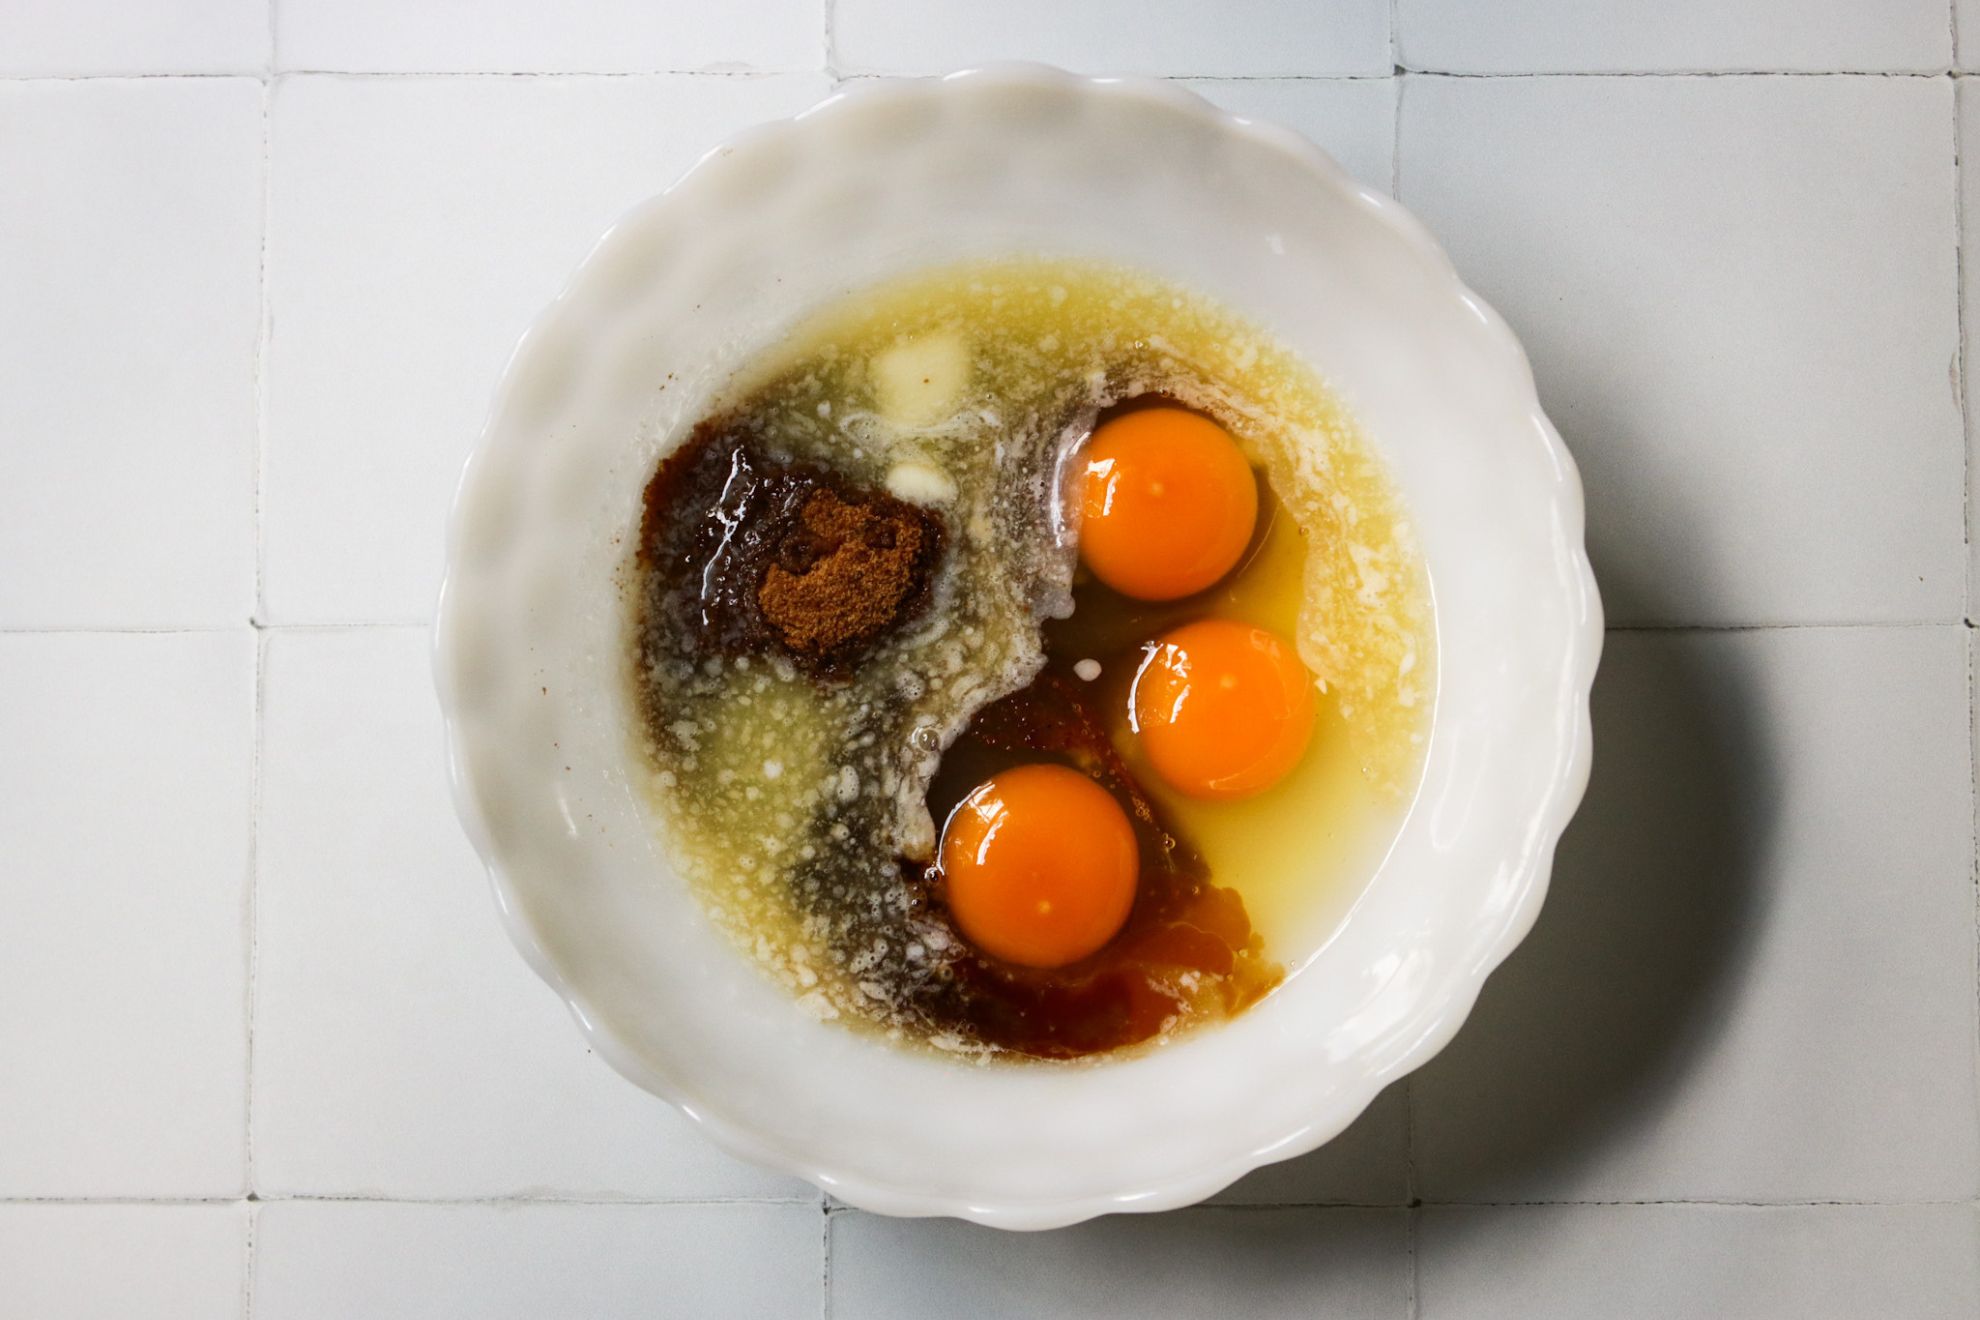 This is an overhead horizontal image of a scalloped milk glass bowl with melted butter, three eggs, and coconut sugar in it. The bowl sits on a white tiled surface.